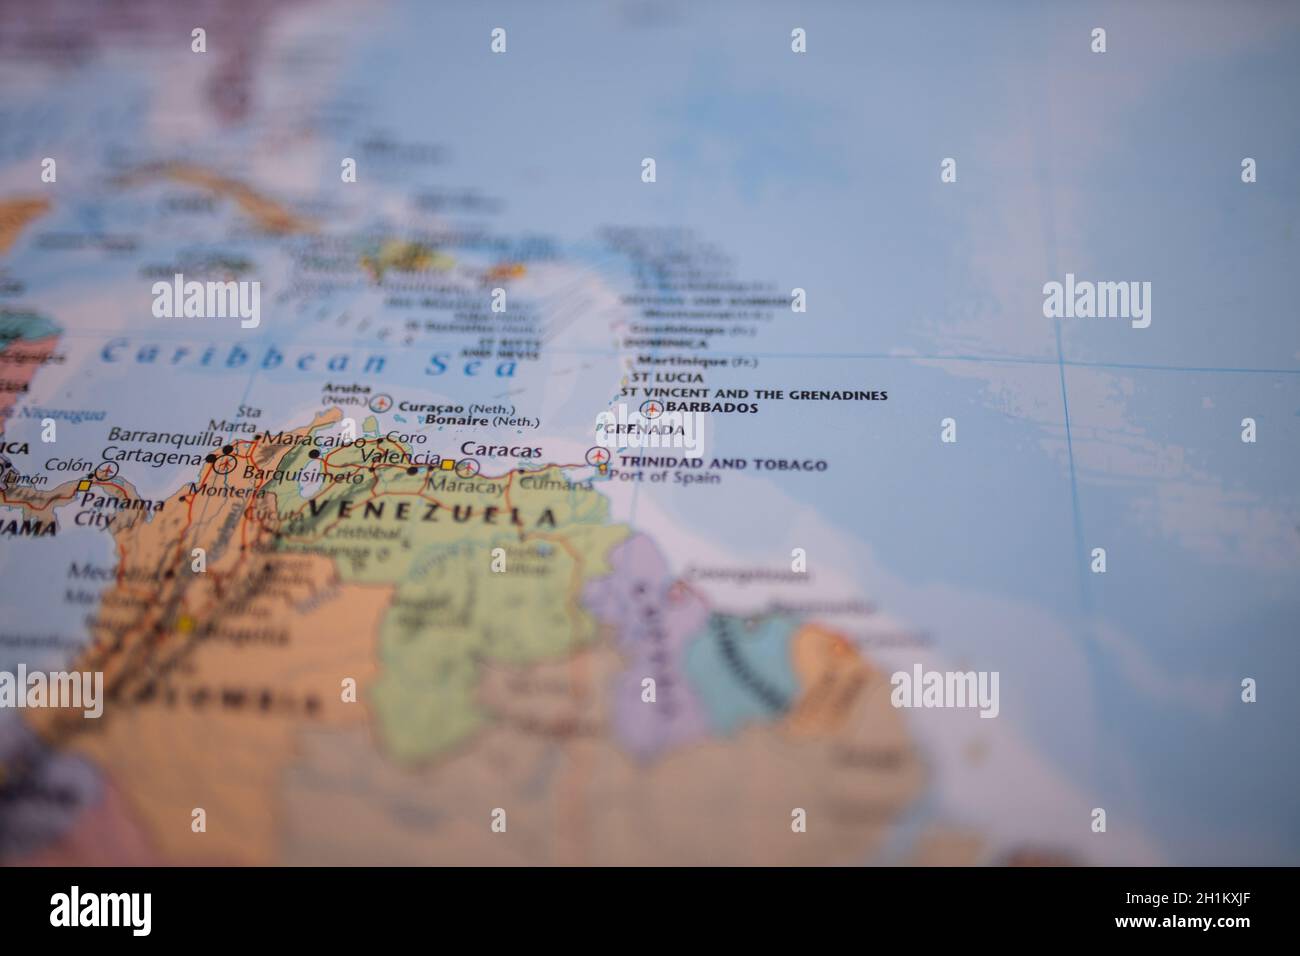 Island country Grenada on a map of South America with its main roads in red and the rest of the countries blurred out Stock Photo